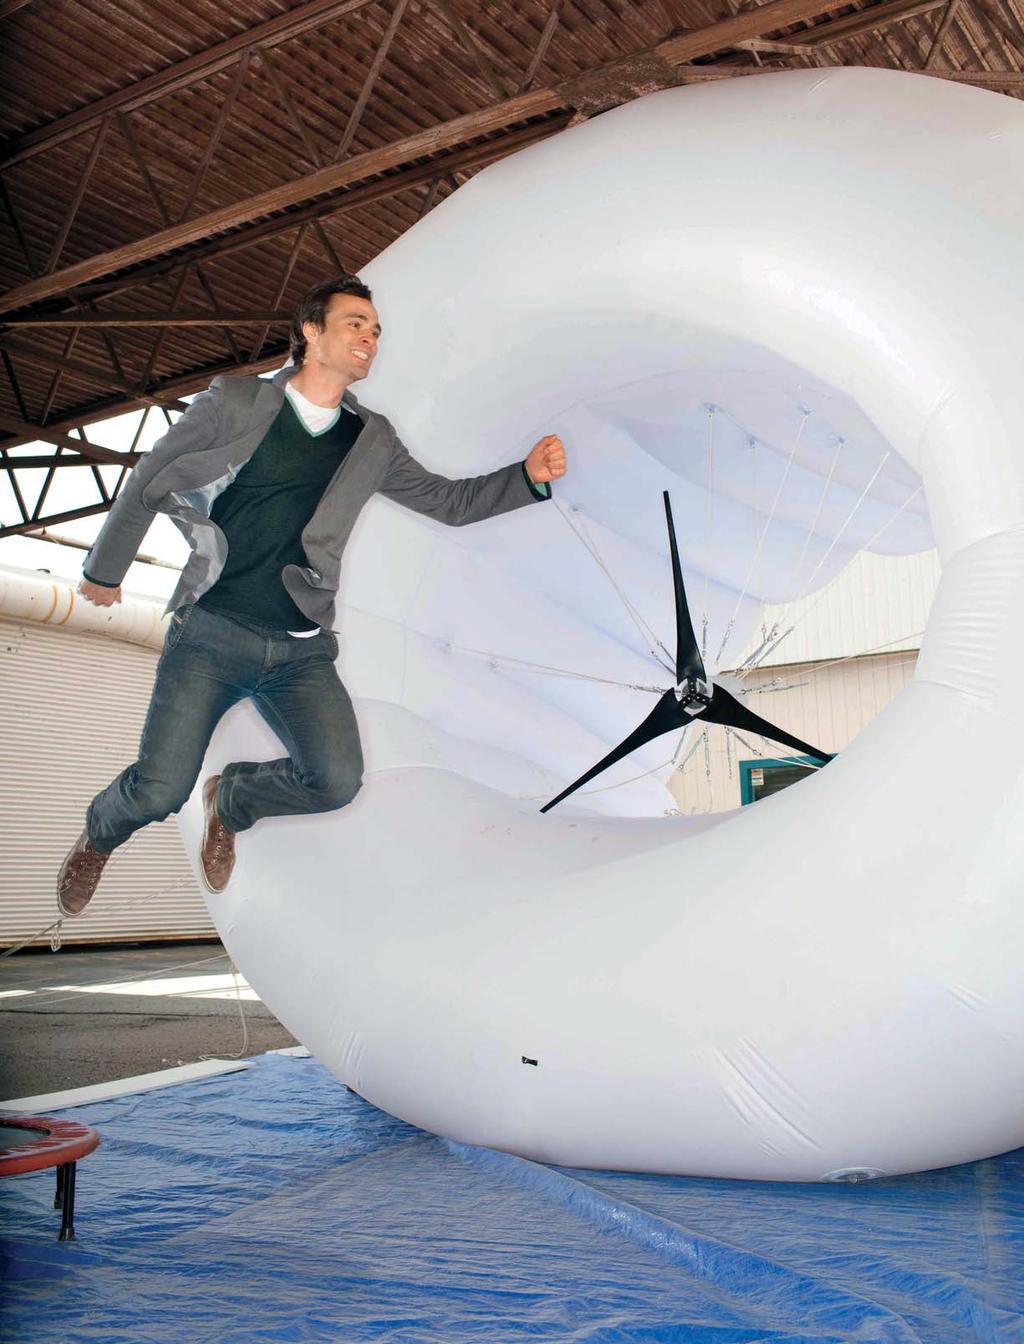 Alain Goubau 11 Part of a team working on an airborne wind turbine a tethered balloon with a turbine at its center